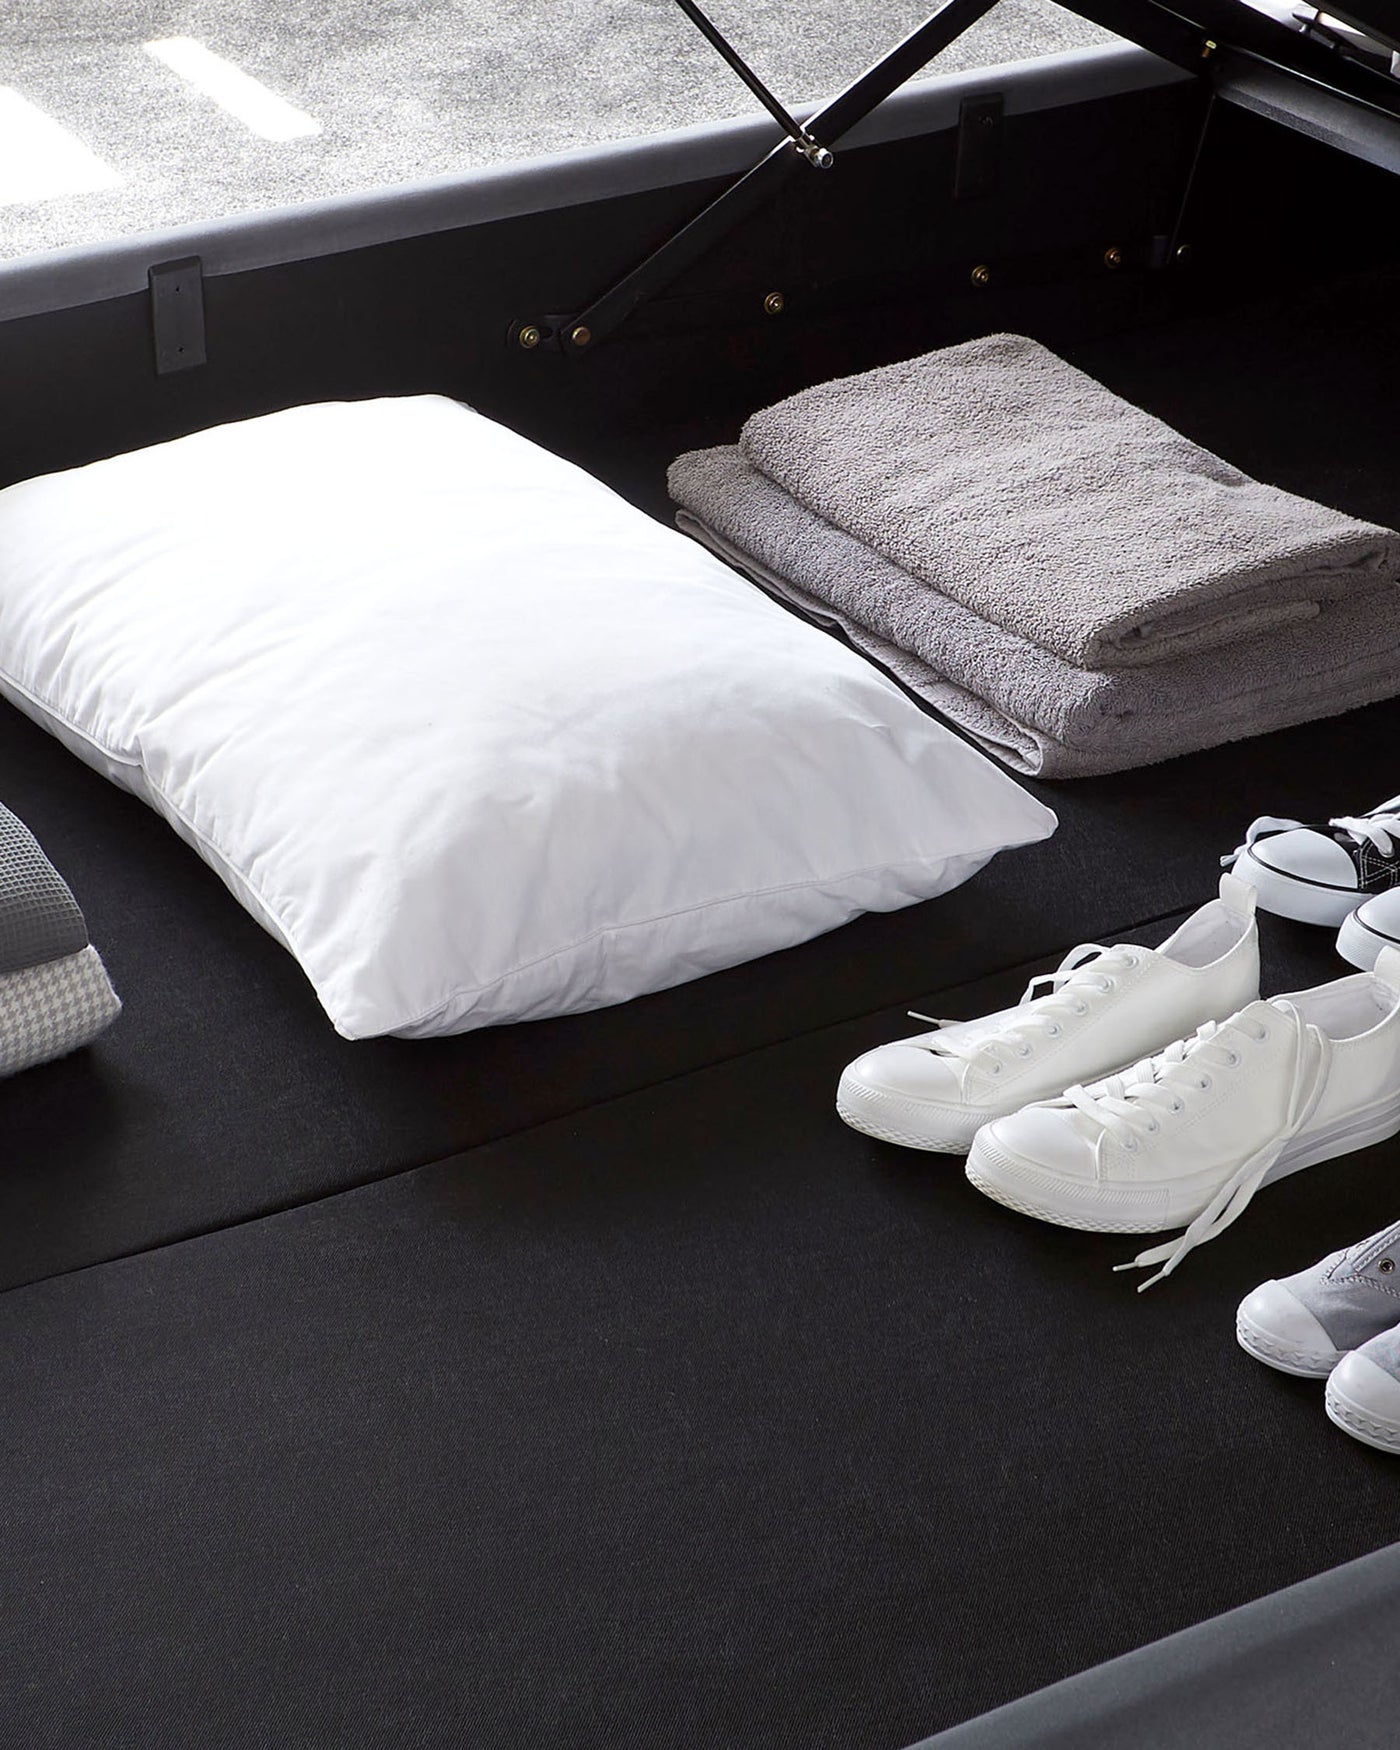 Black upholstered storage bed with gas-lift mechanism, displaying white linens and grey folded towels on one side.